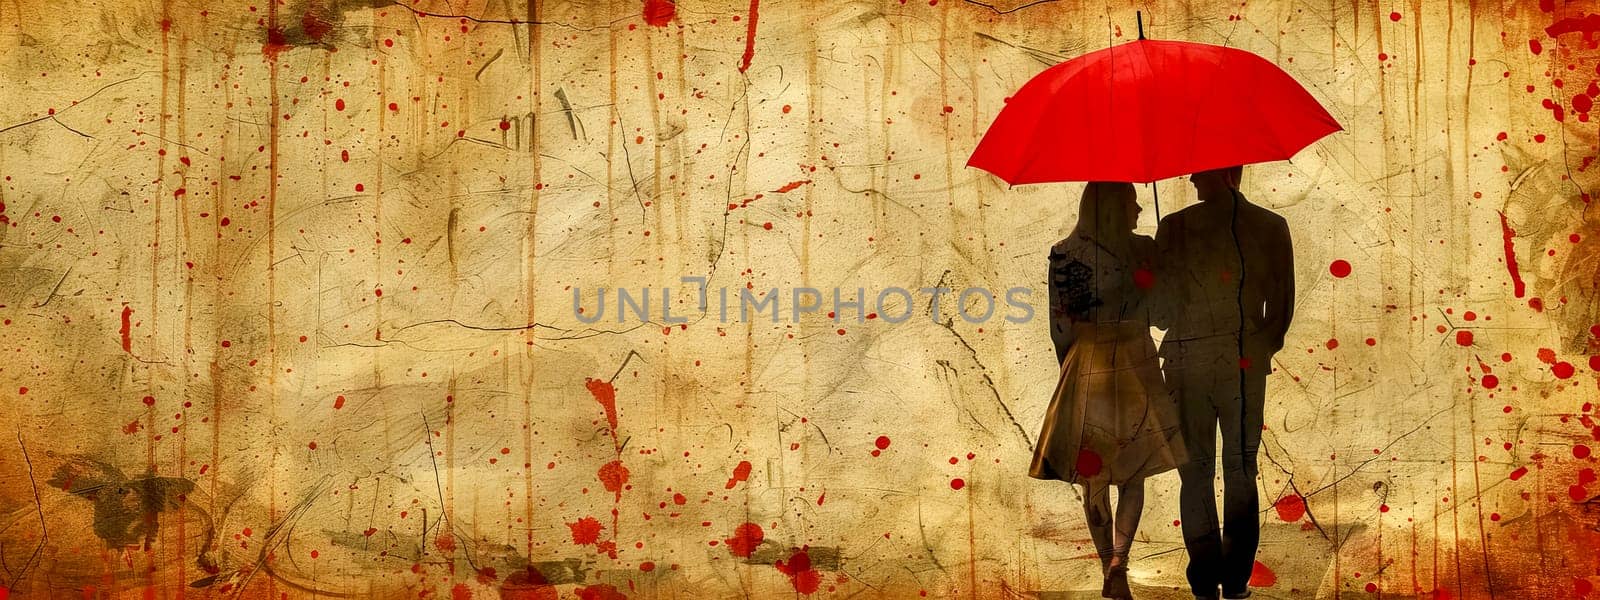 Silhouette of a couple with a bright red umbrella against a grunge, paint-splattered backdrop